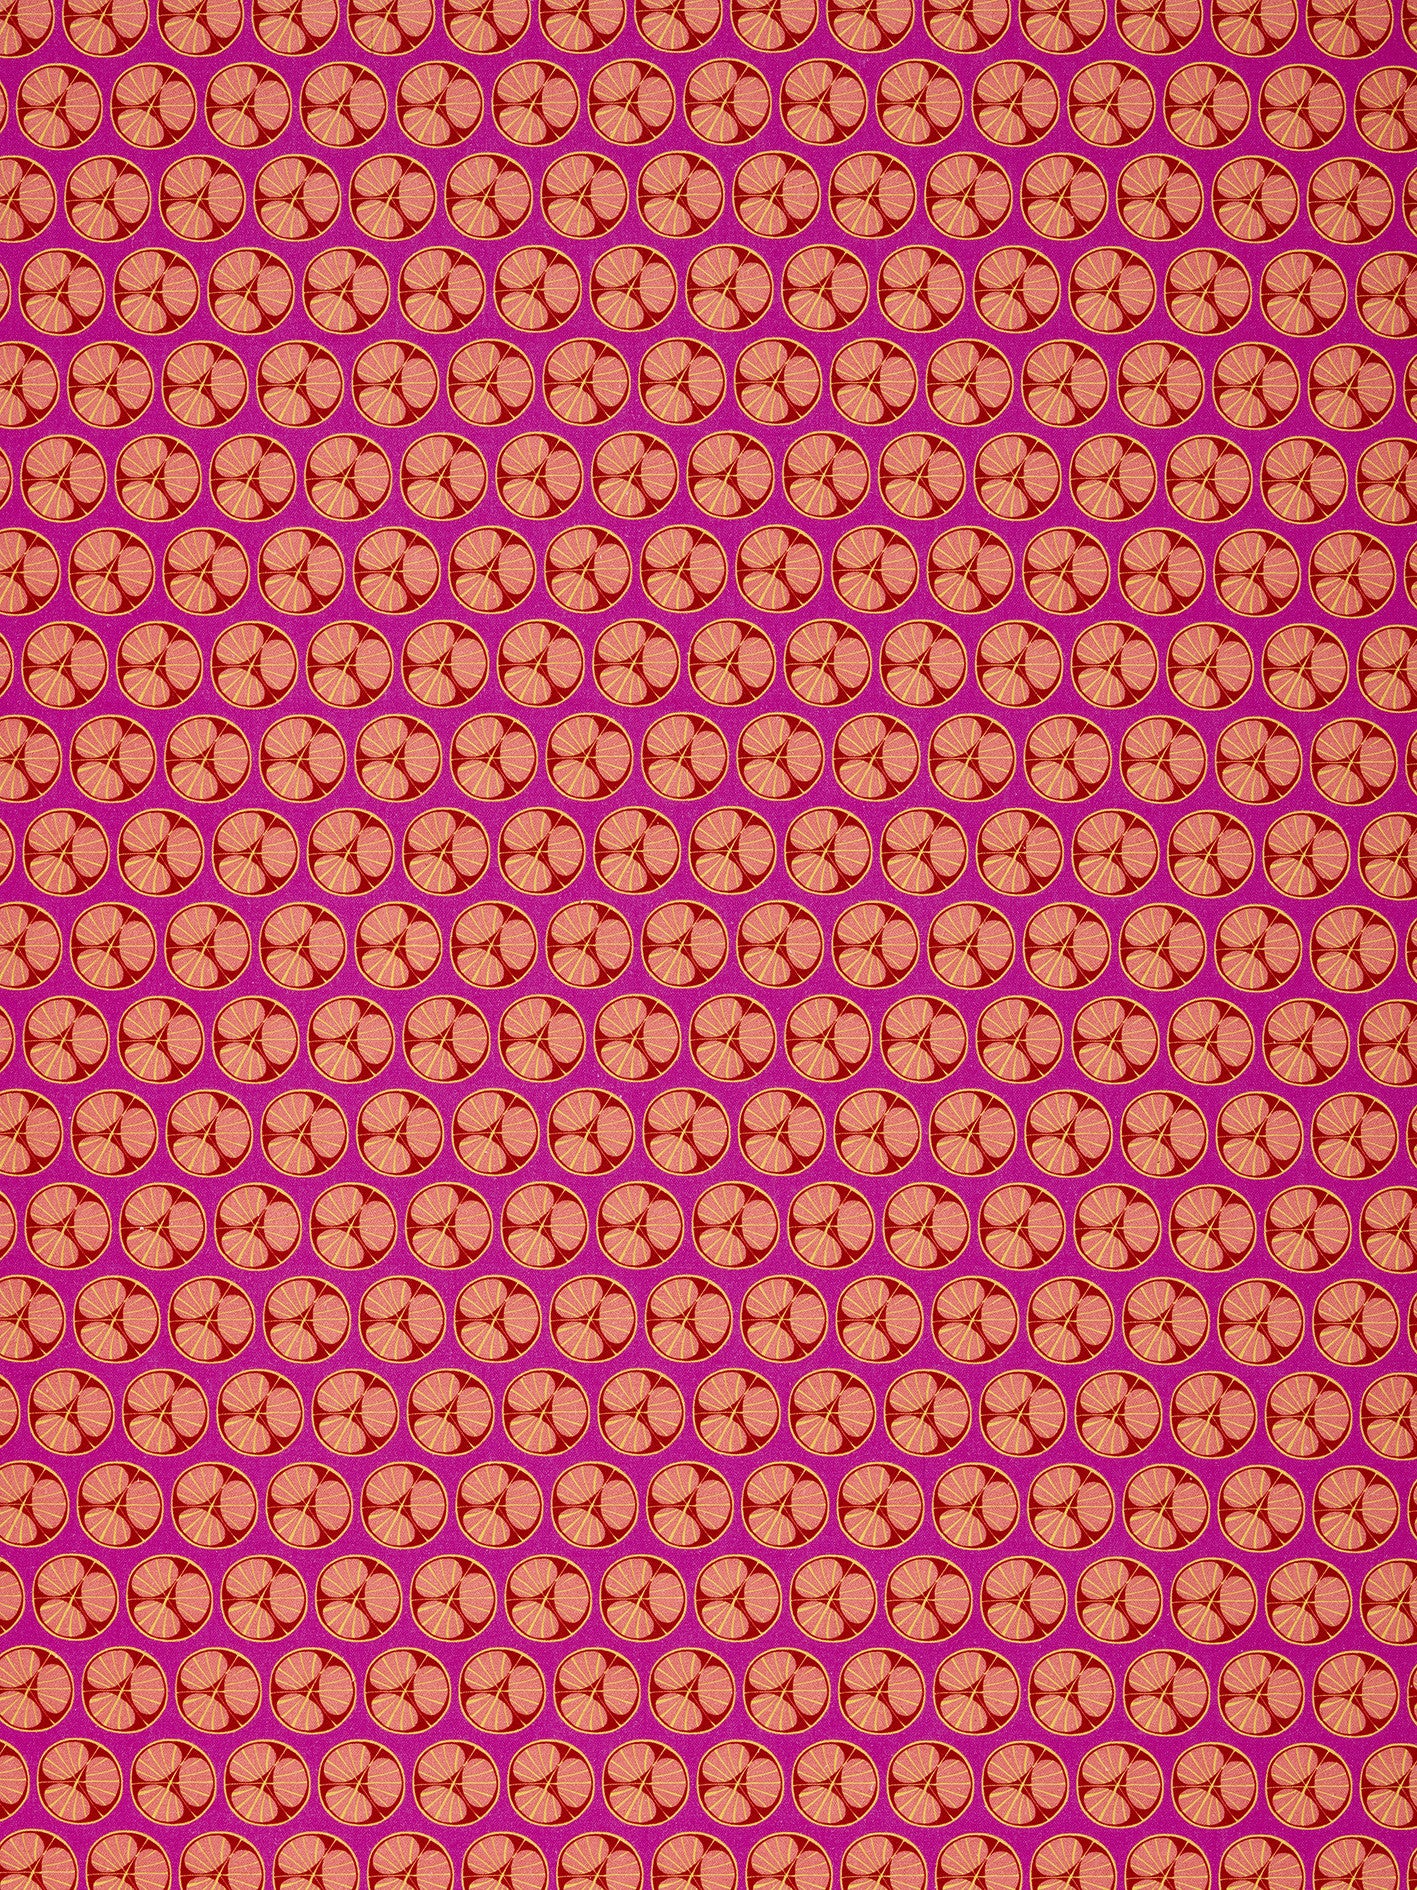 Graphic Cross Section of Fruit  Pattern Printed Linen Cotton Canvas Fabric in Fuchsia Pink, Red, Coral